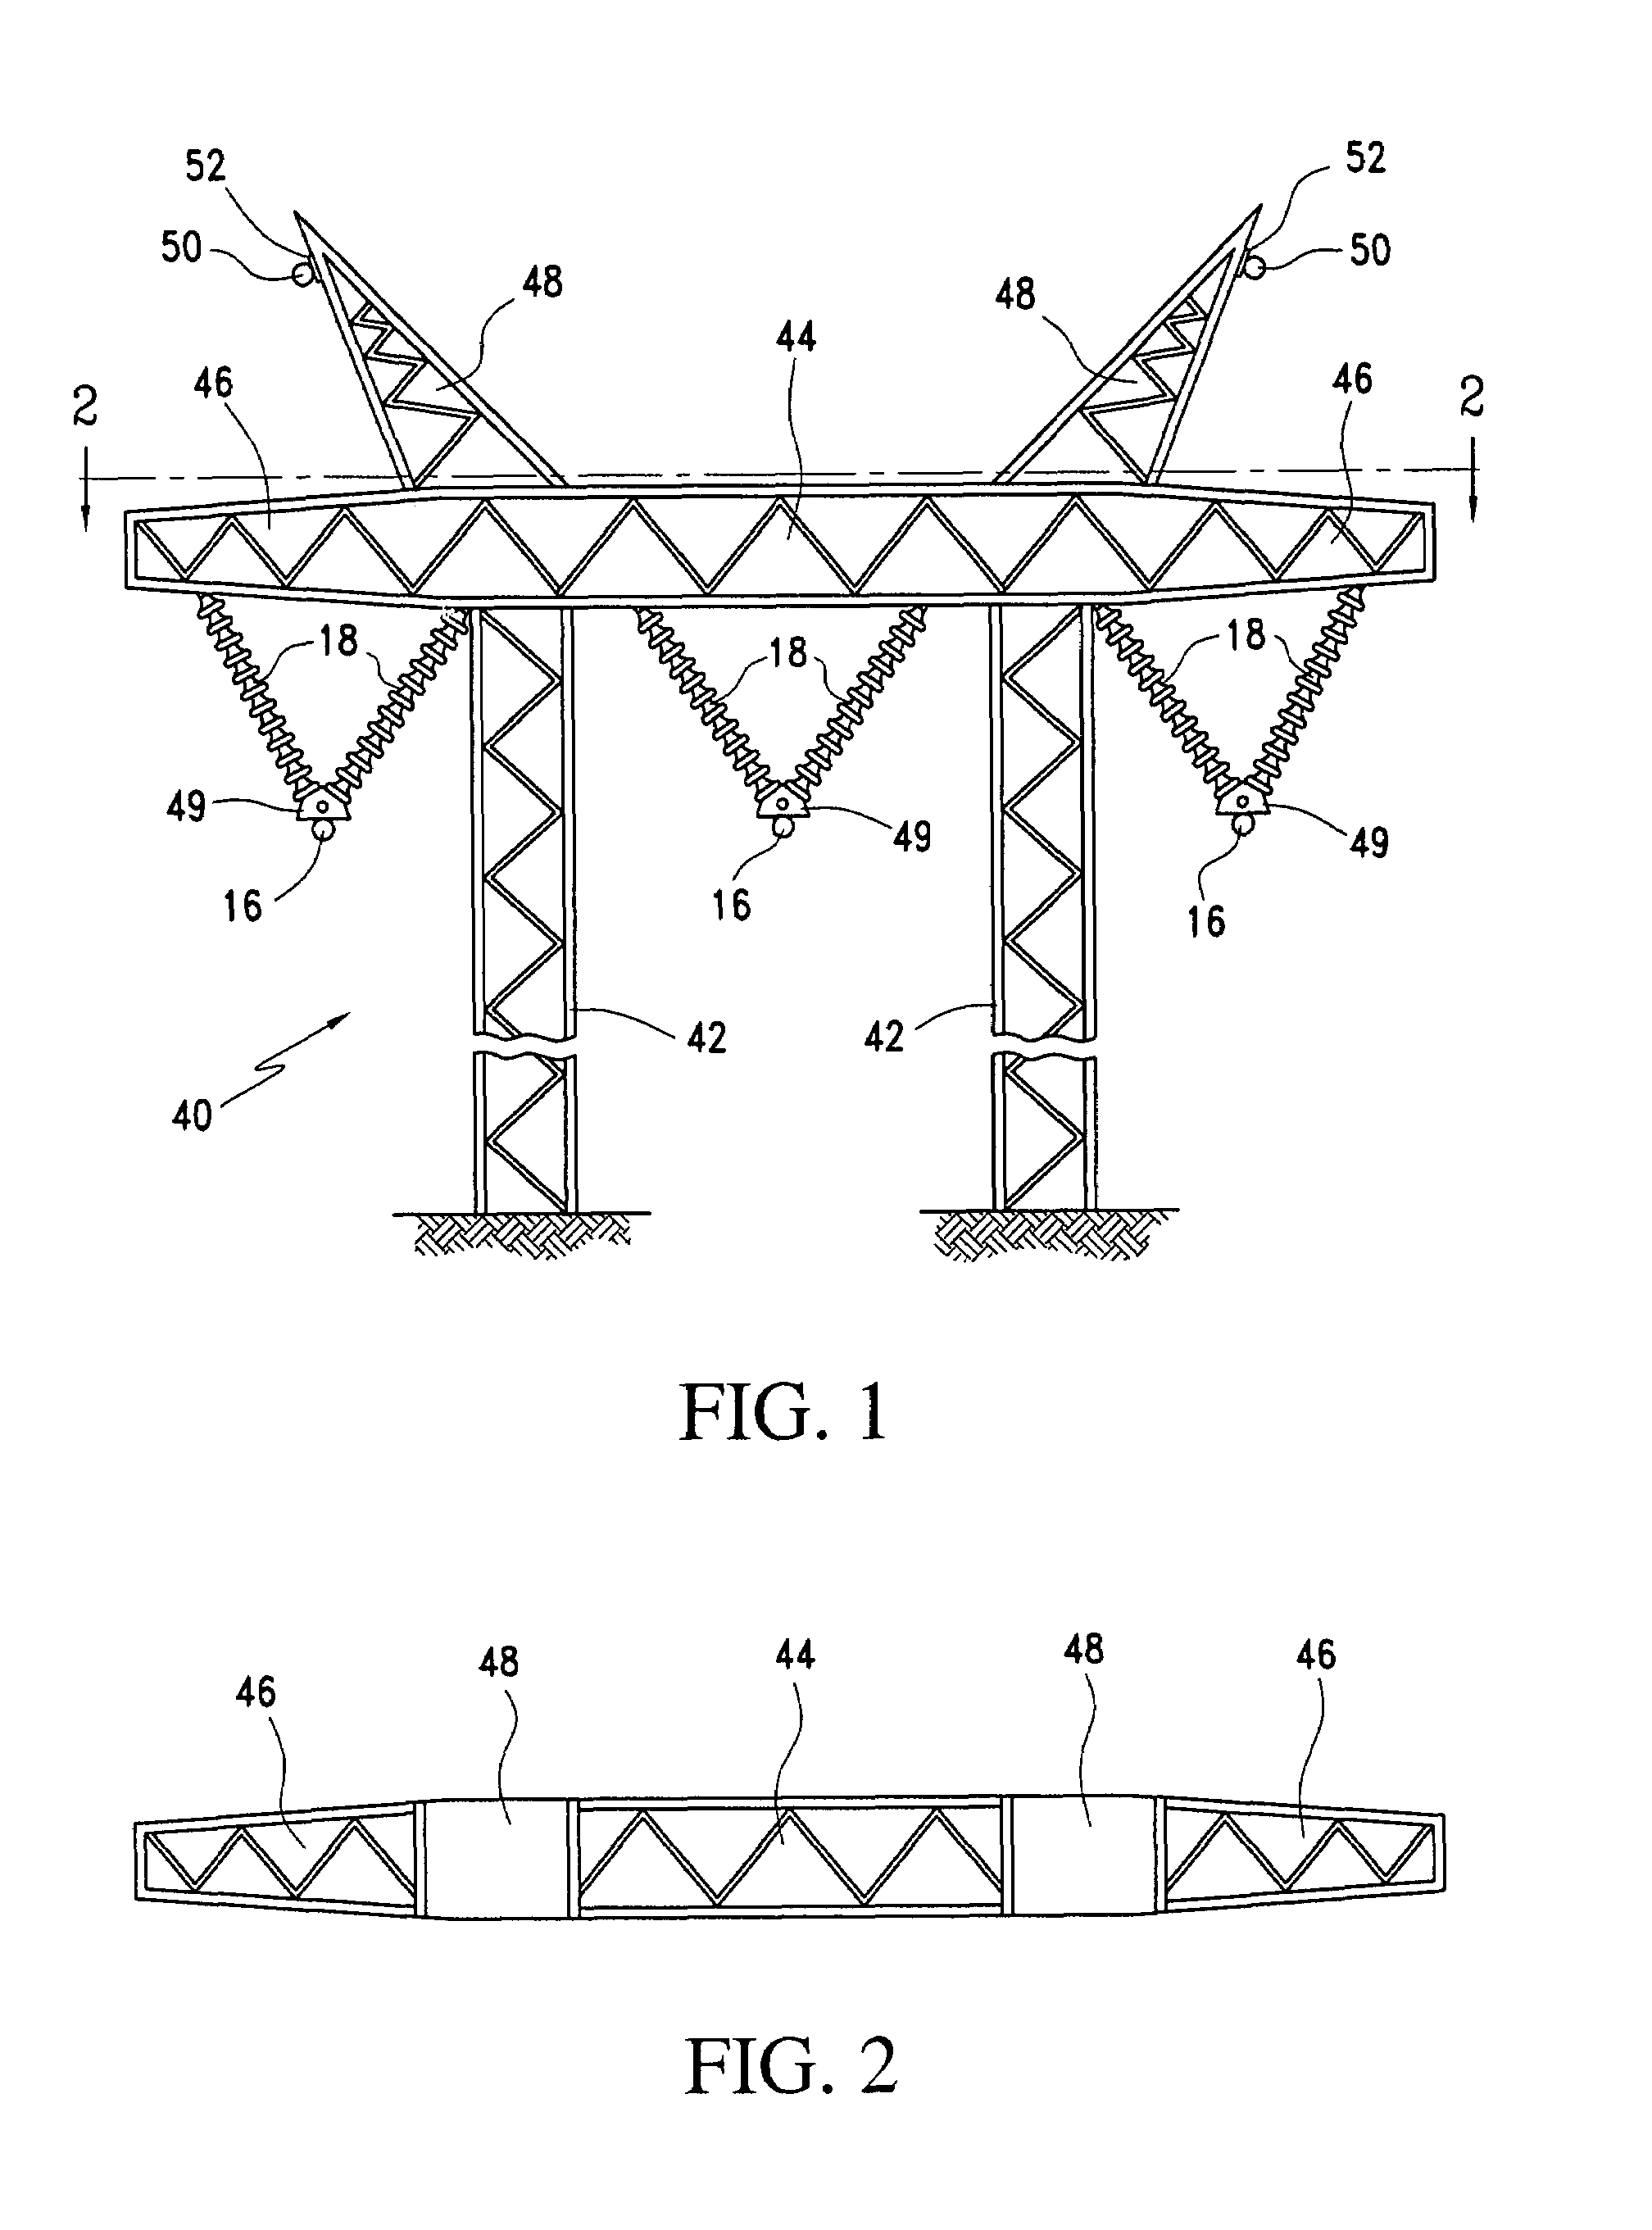 Conductor support assembly